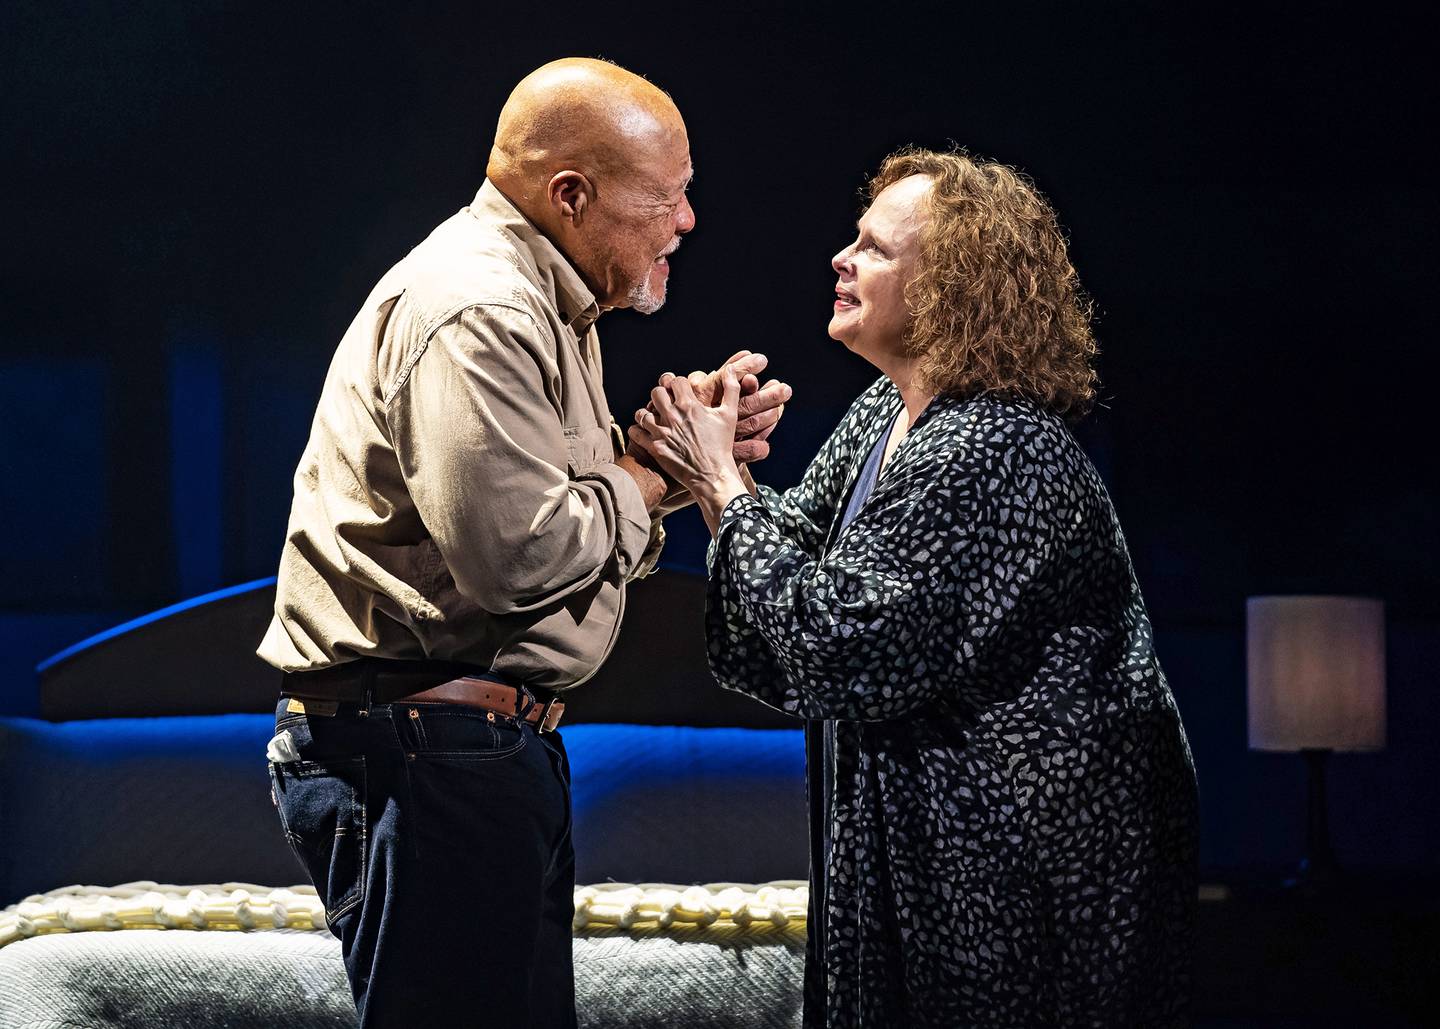 Older Noah (John Beasley) and Older Allie (Maryann Plunkett) in Chicago Shakespeare Theater’s world premiere production of "The Notebook," a new musical.